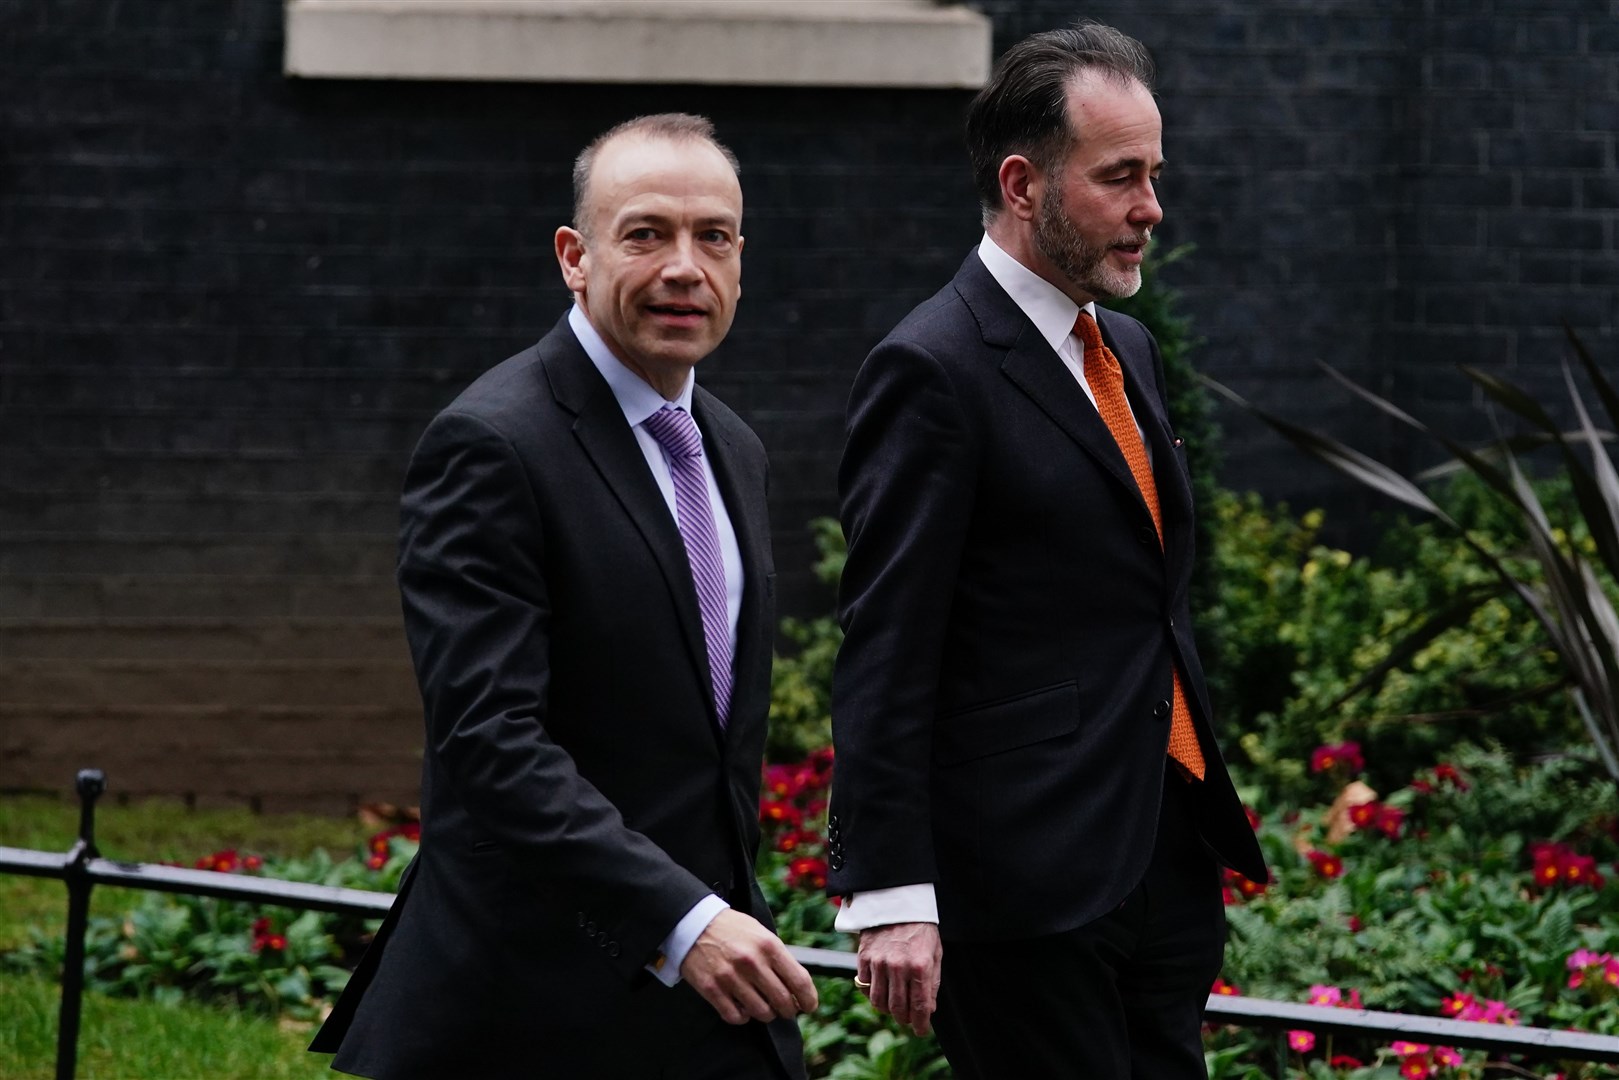 Chris Pincher, right, with chief whip Chris Heaton-Harris leaving Downing Street following their appointment in February (Aaron Chown/PA)